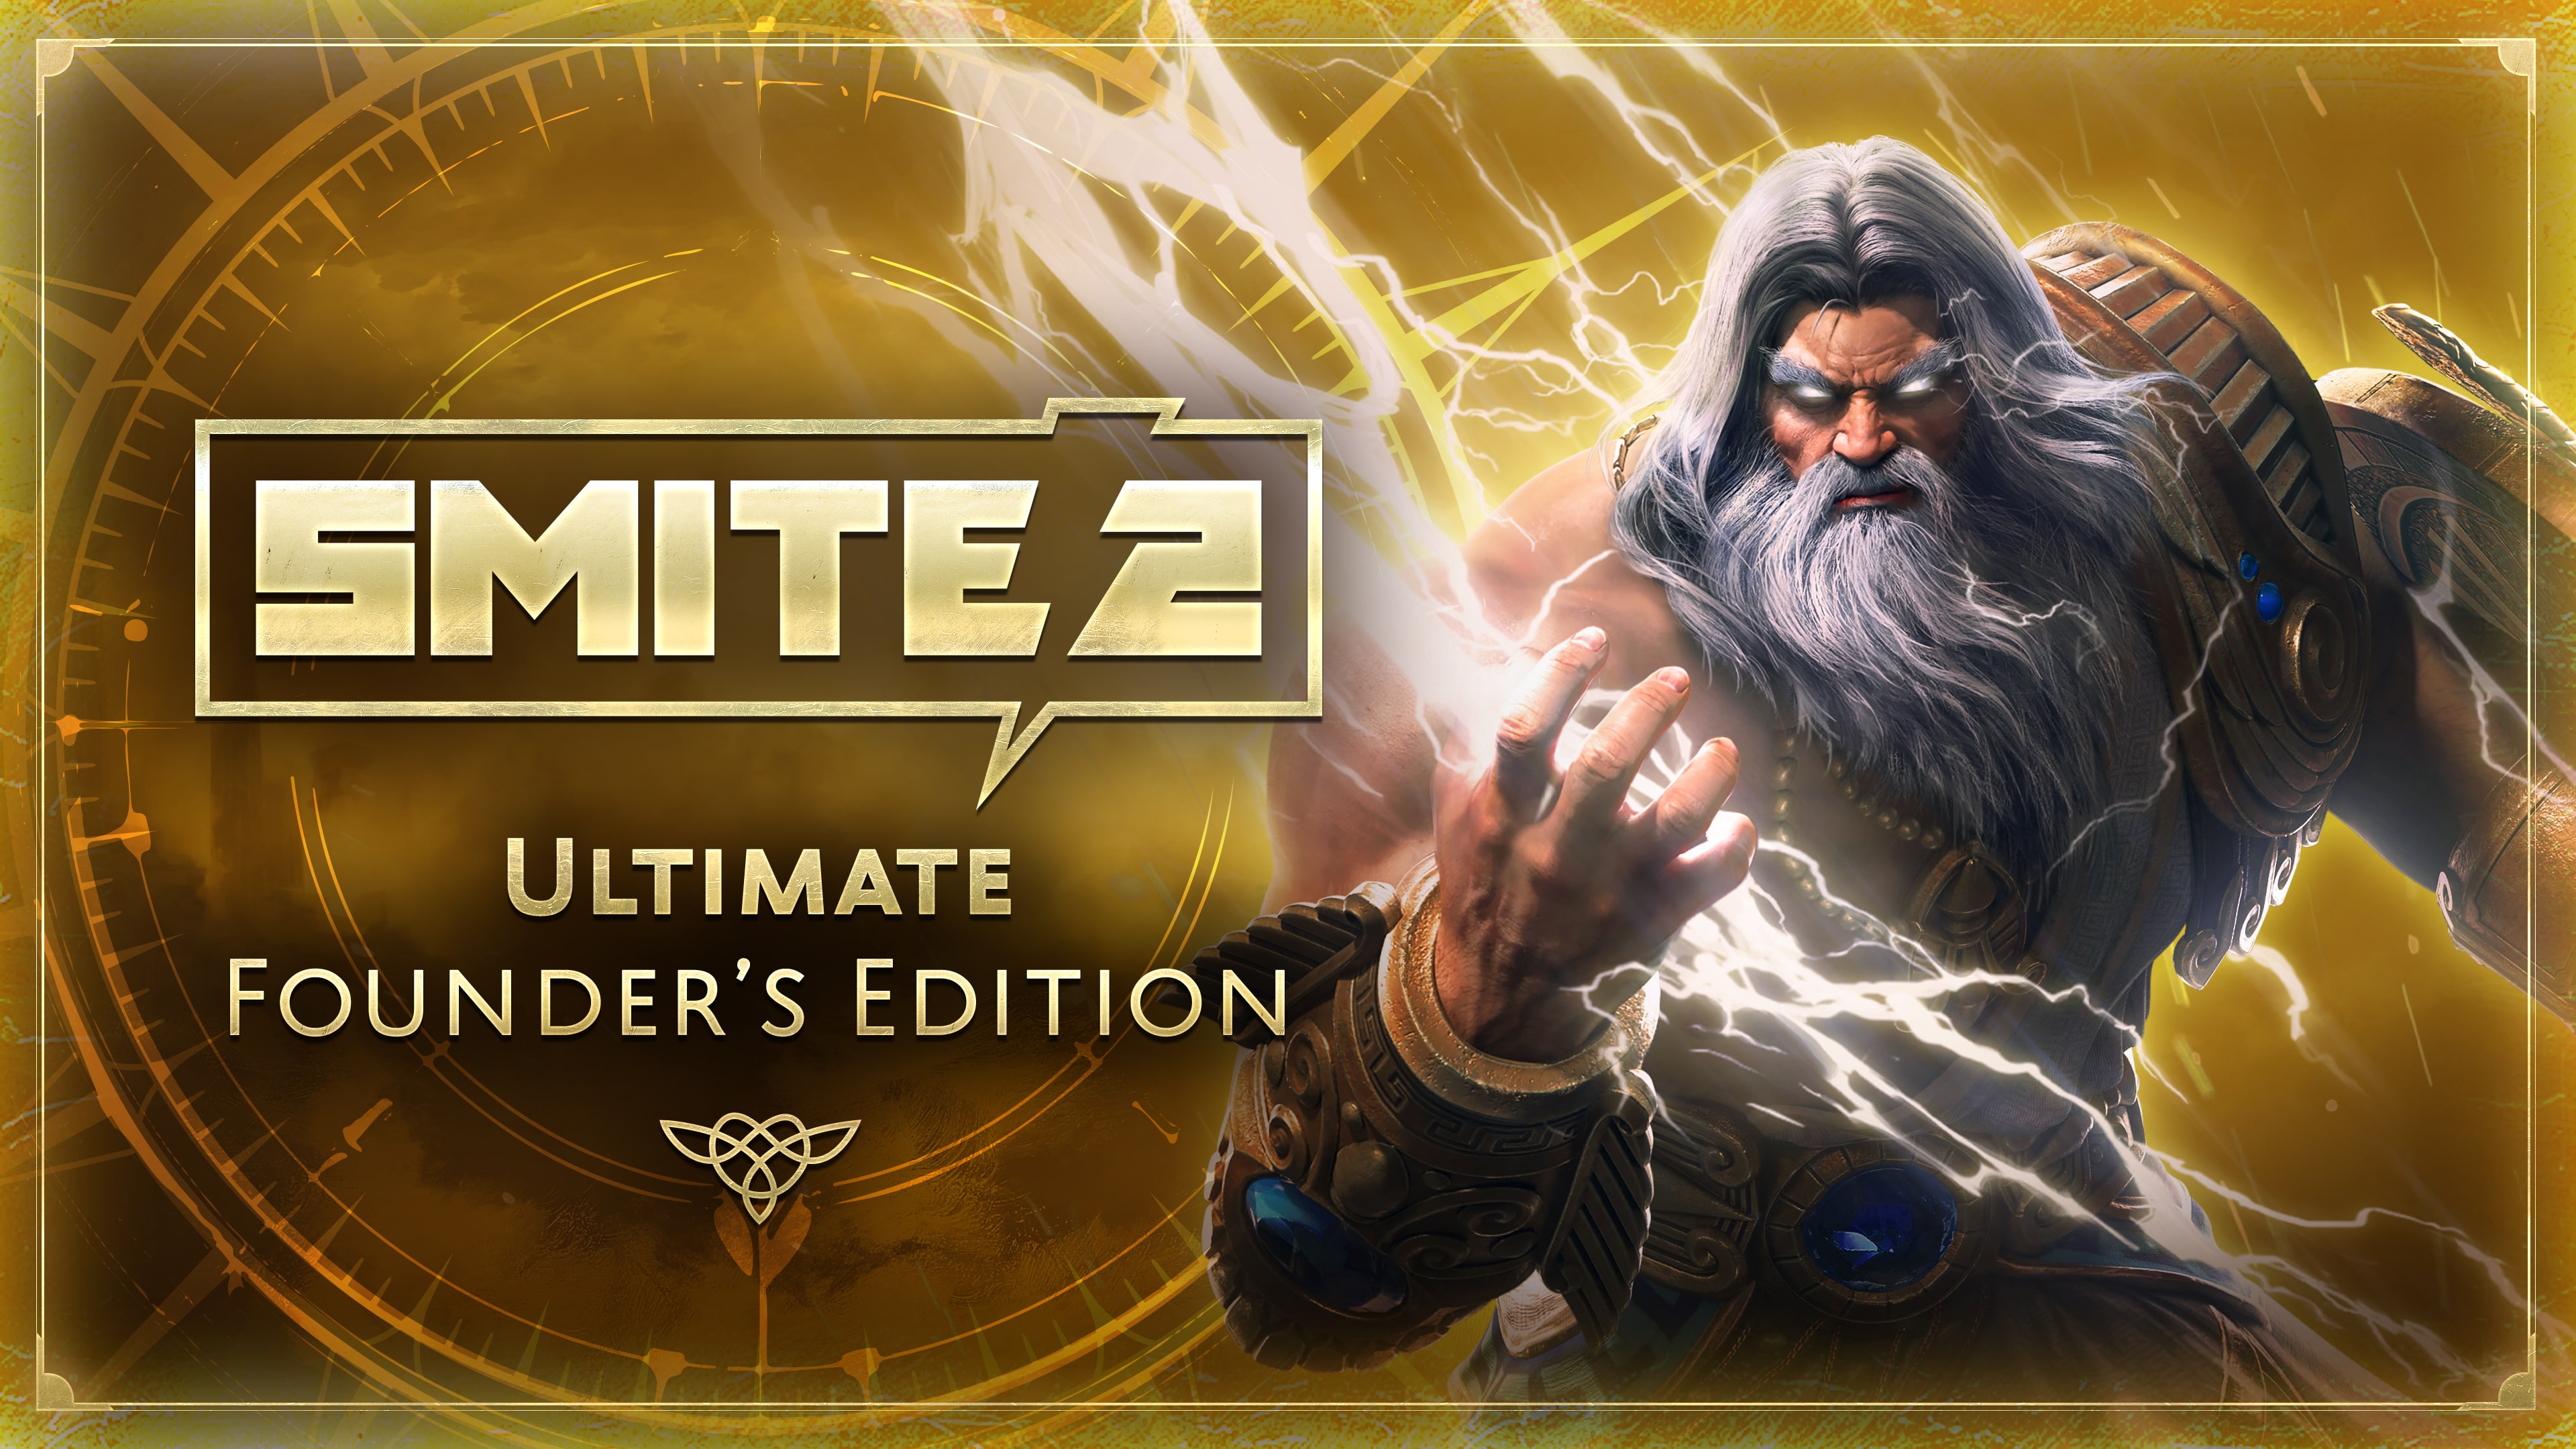 Ultimate Founder's Edition